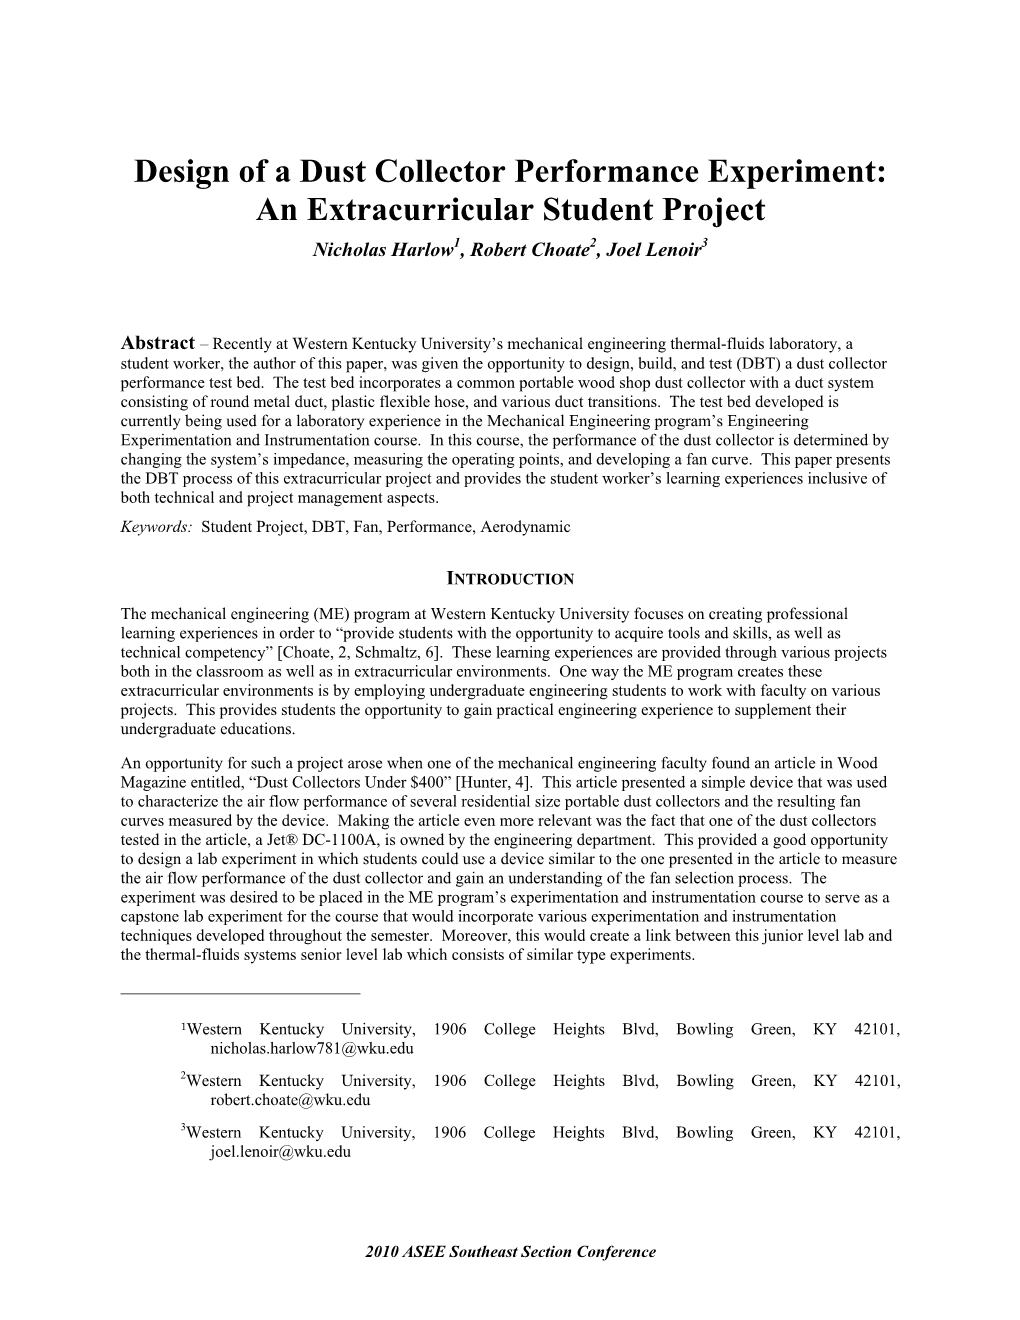 Design of a Dust Collector Performance Experiment: an Extracurricular Student Project Nicholas Harlow1, Robert Choate2, Joel Lenoir3